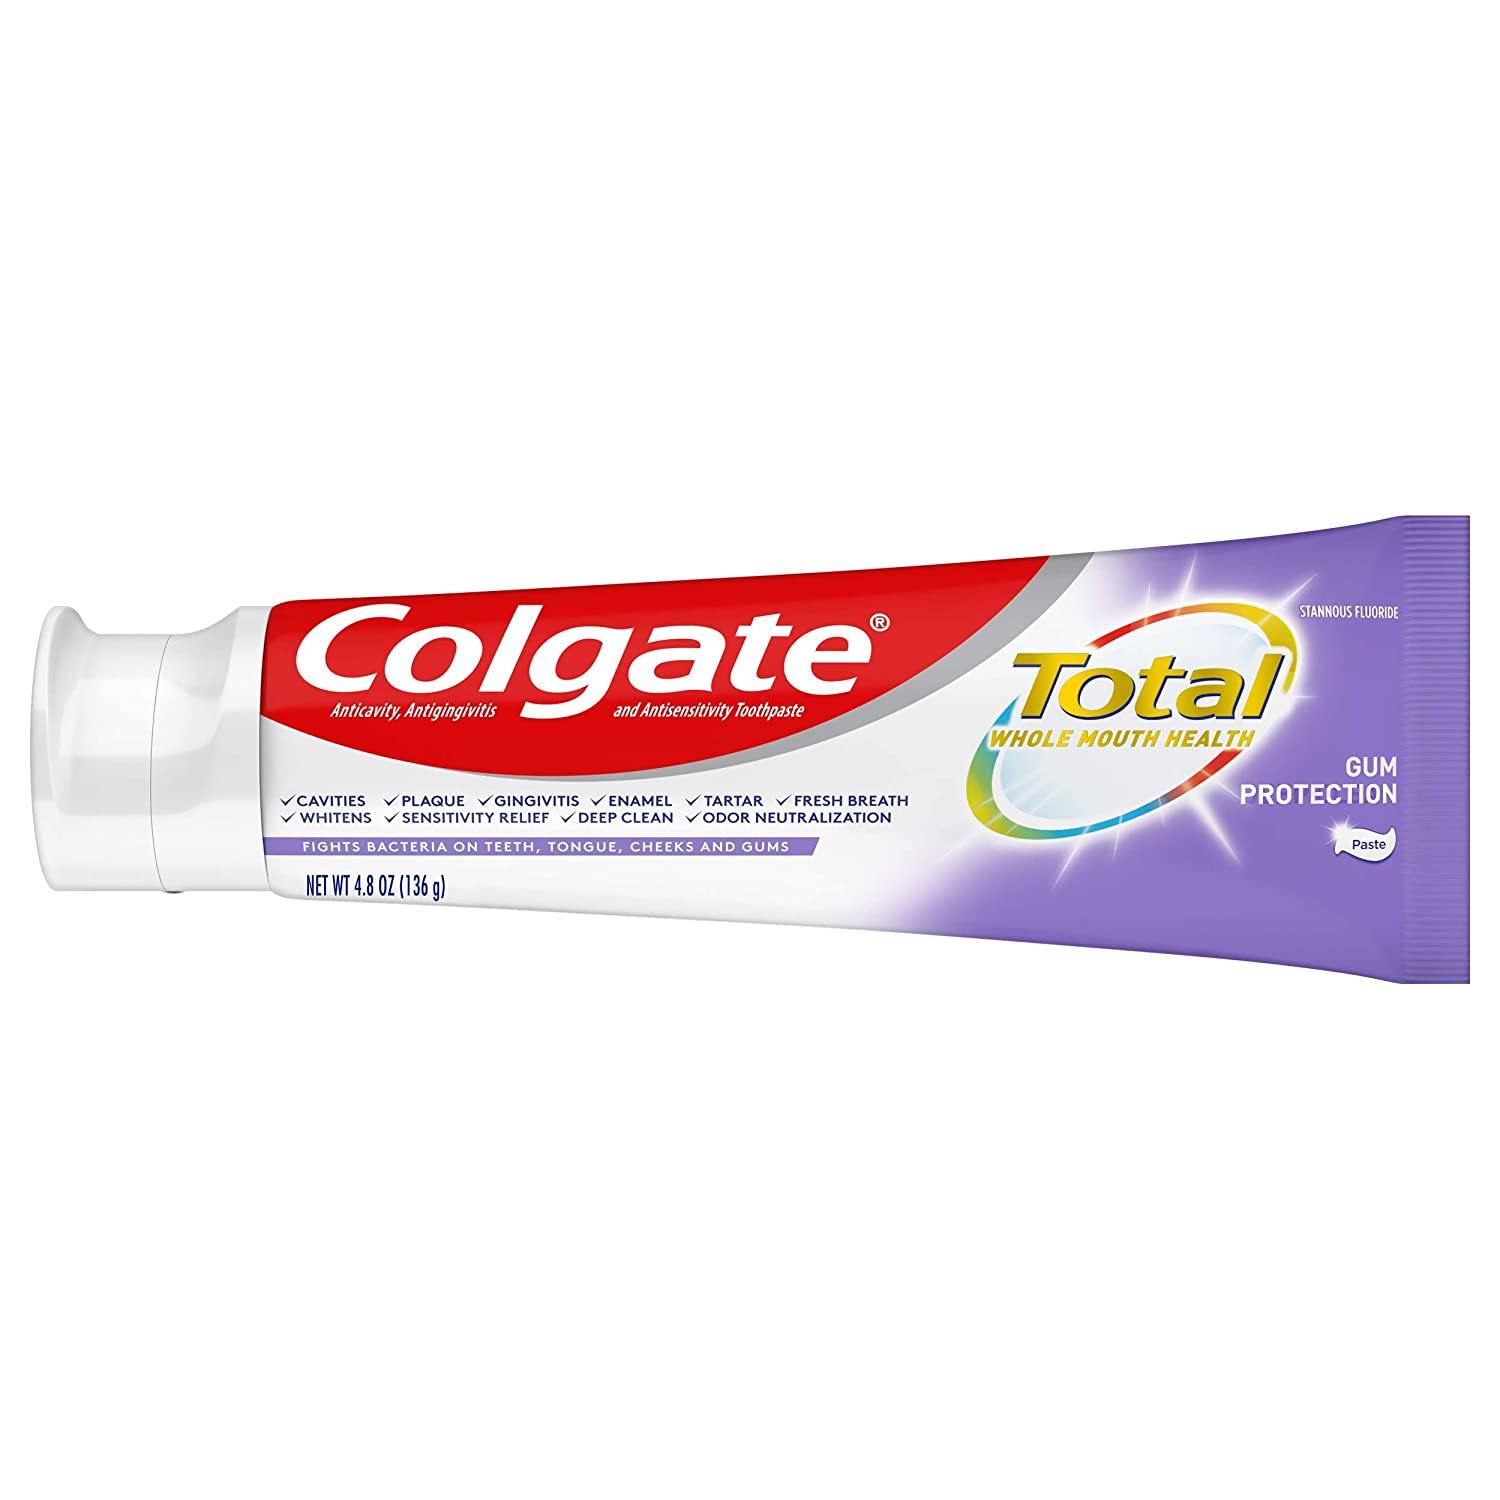 WALGREENS Two Tubes of Colgate Total Gum Protection Toothpaste $4 after digital, pay w/wags cash, get back $4 in Wags Cash, FREE SHIPPING TO HOME